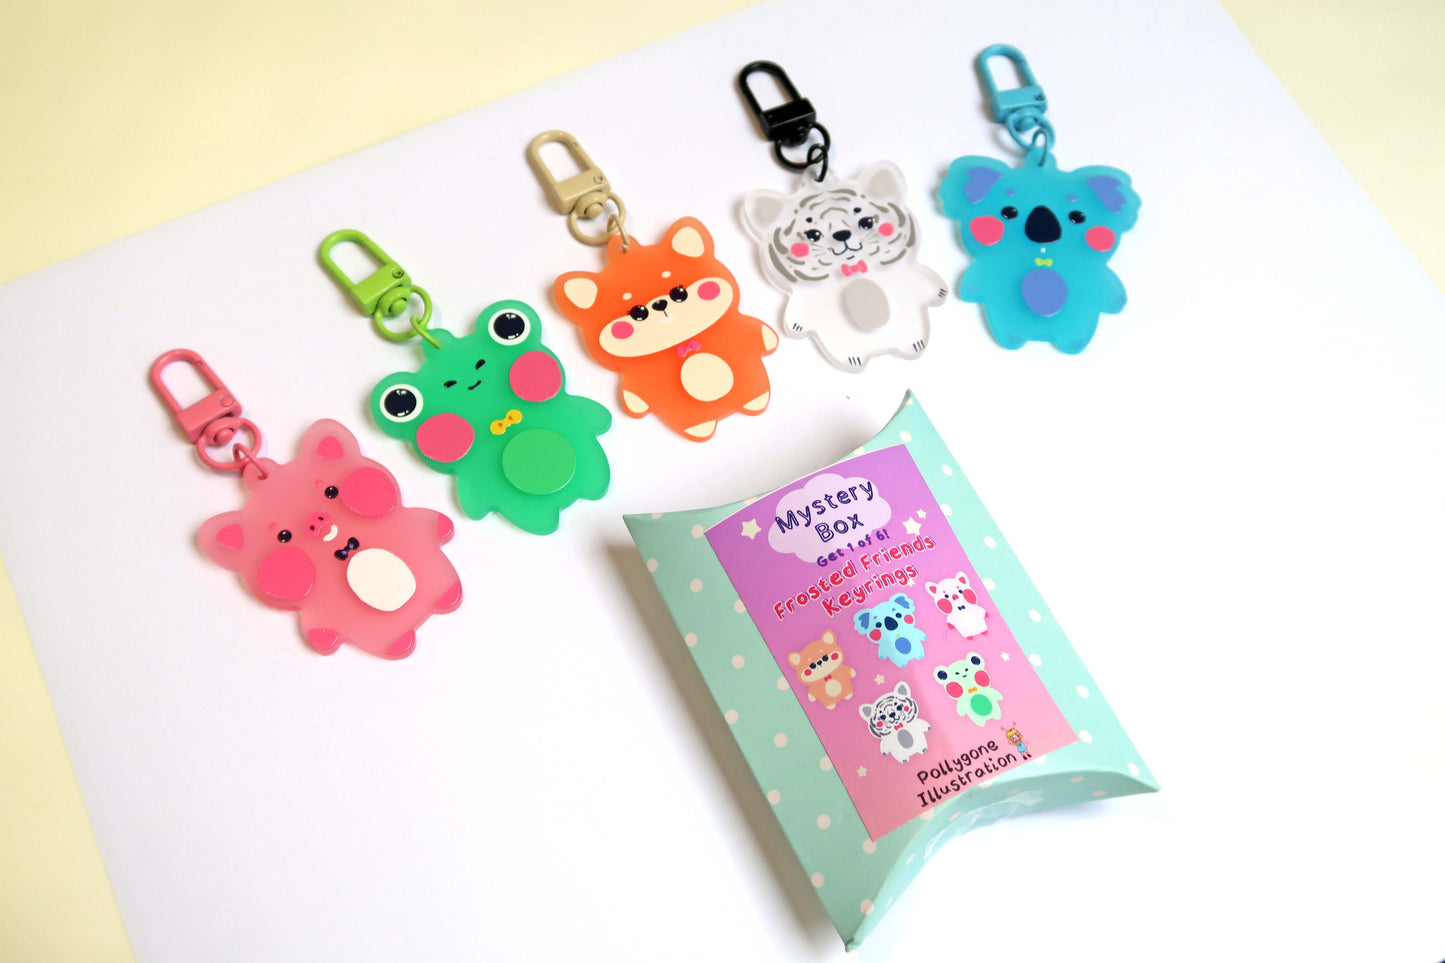 Frosted Friends Mystery Box Keyring Surprise